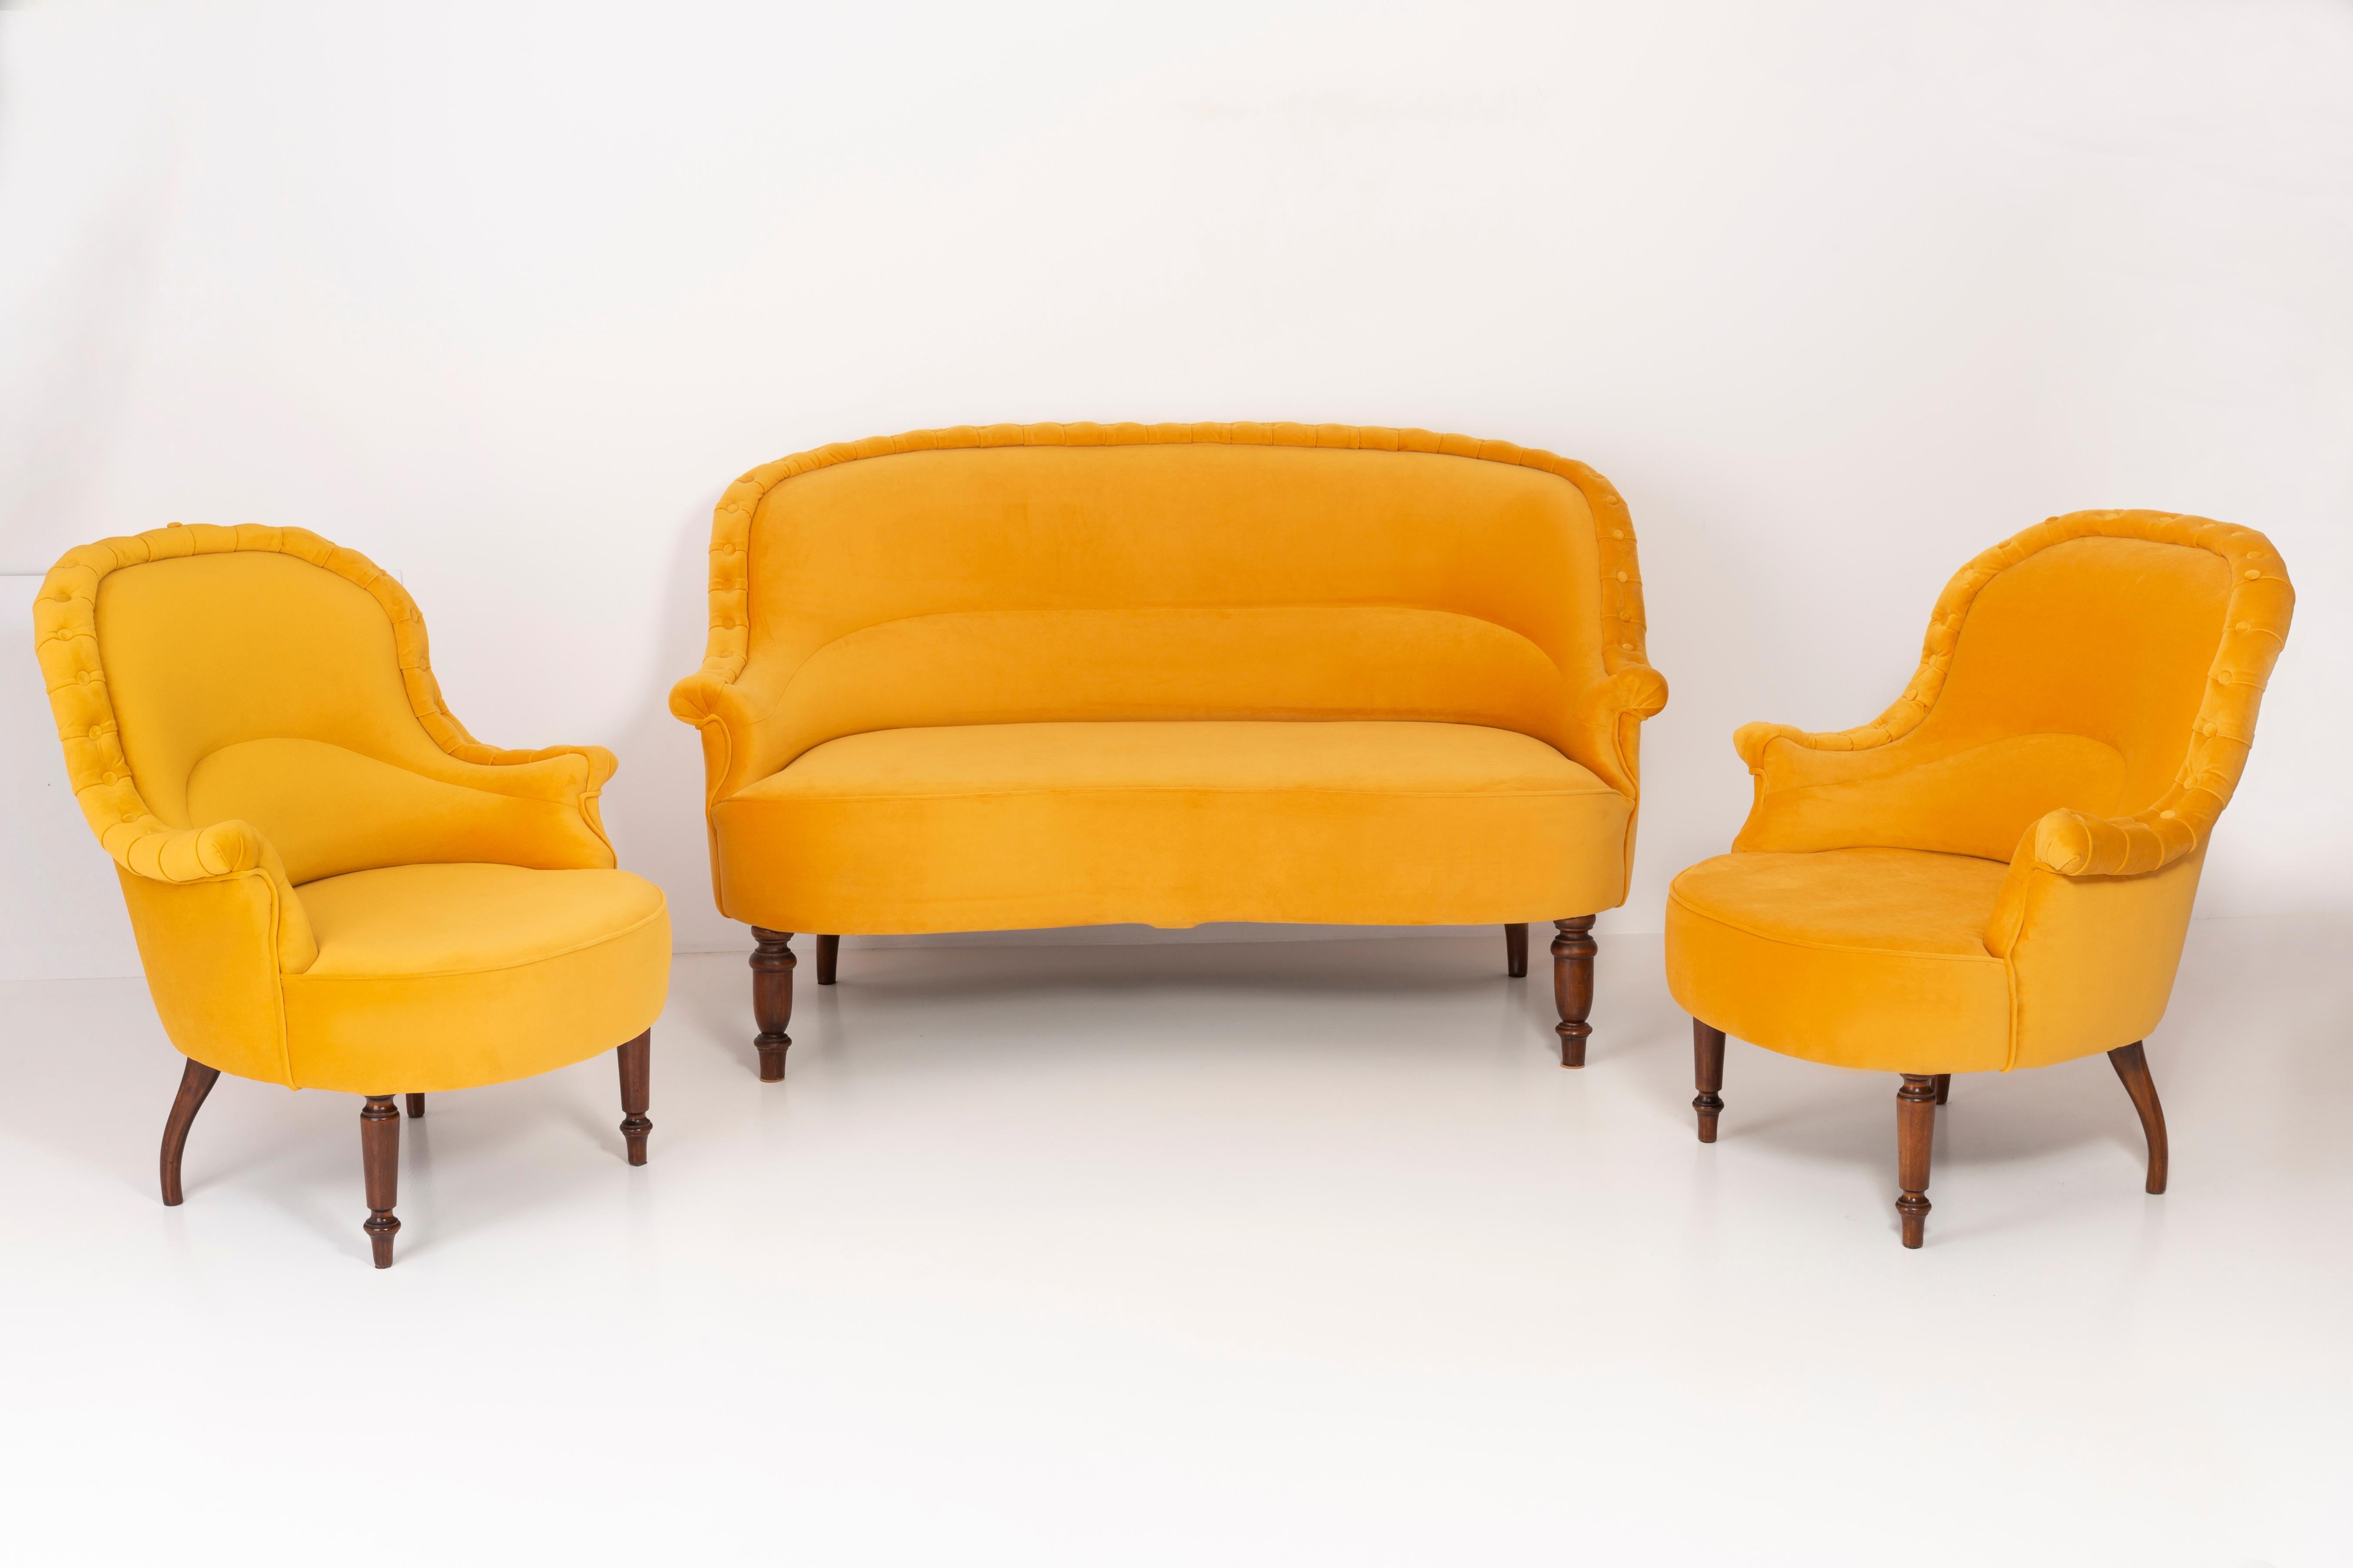 Sofa in Louis XVI Style Yellow Mustard, 1930s, Germany For Sale 5